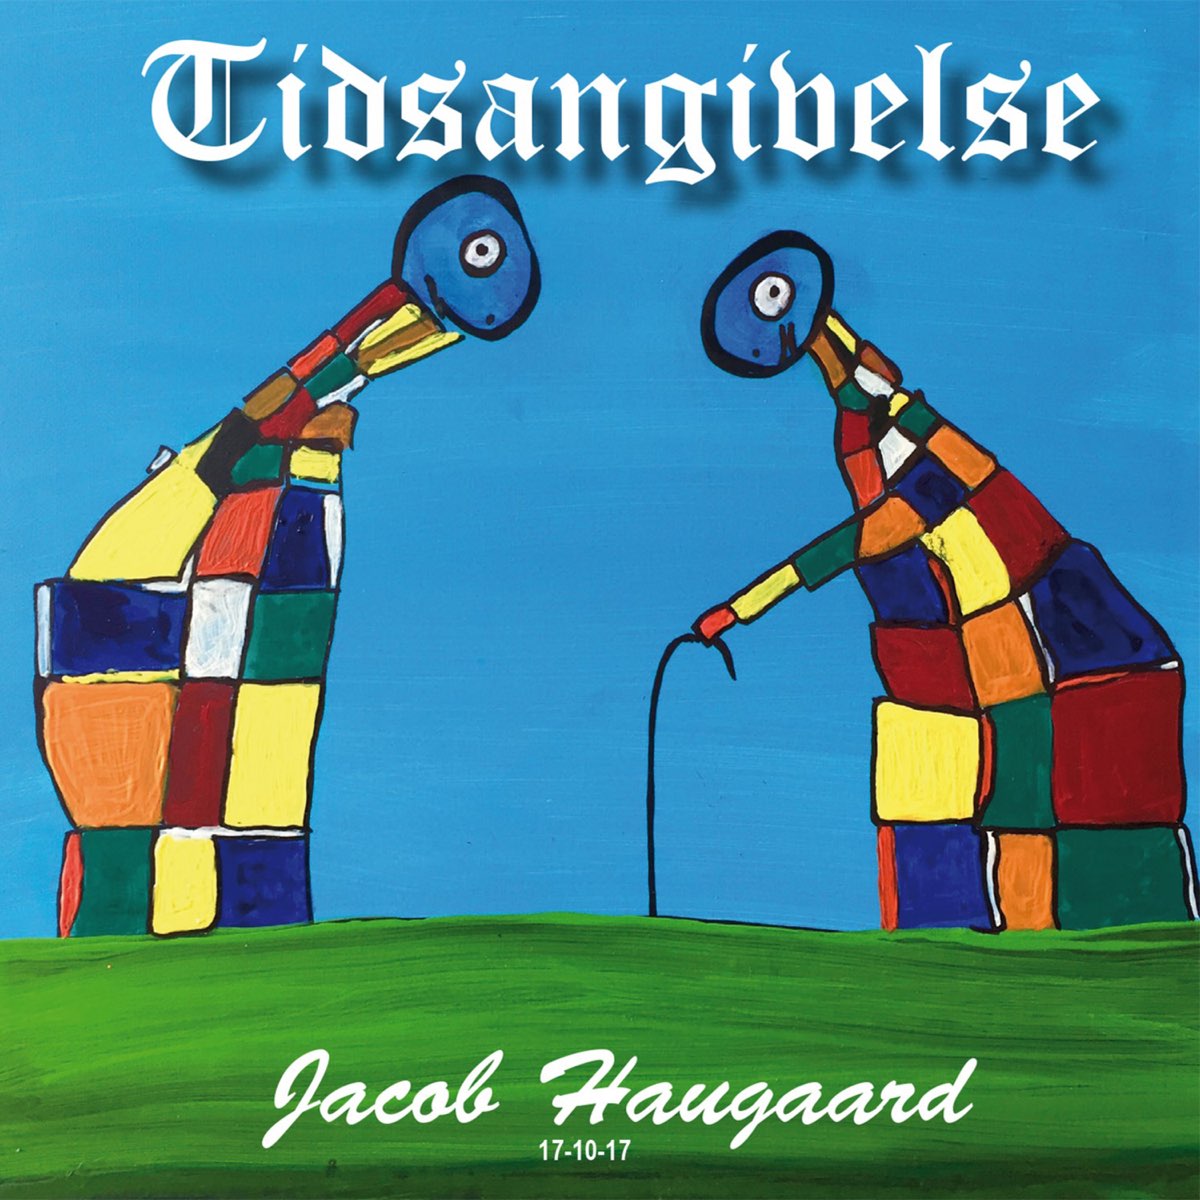 Tidsangivelse by Jacob Haugaard on Apple Music